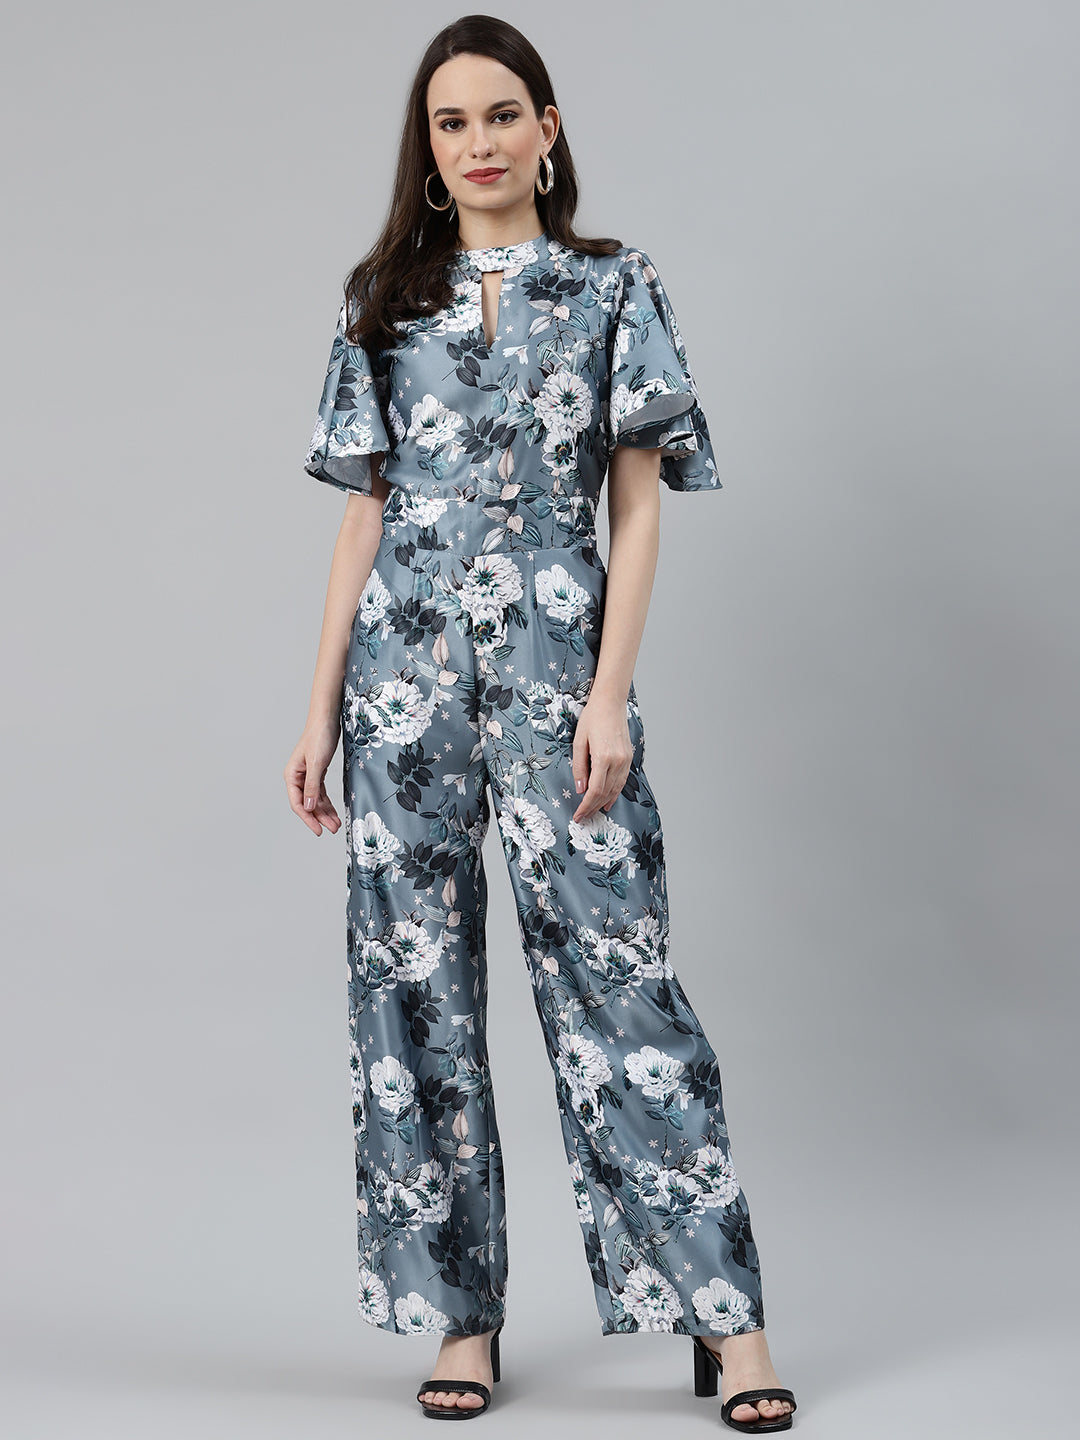 Jompers Women Grey & Off-White Printed Keyhole Neck Flared Sleeves Basic Jumpsuit